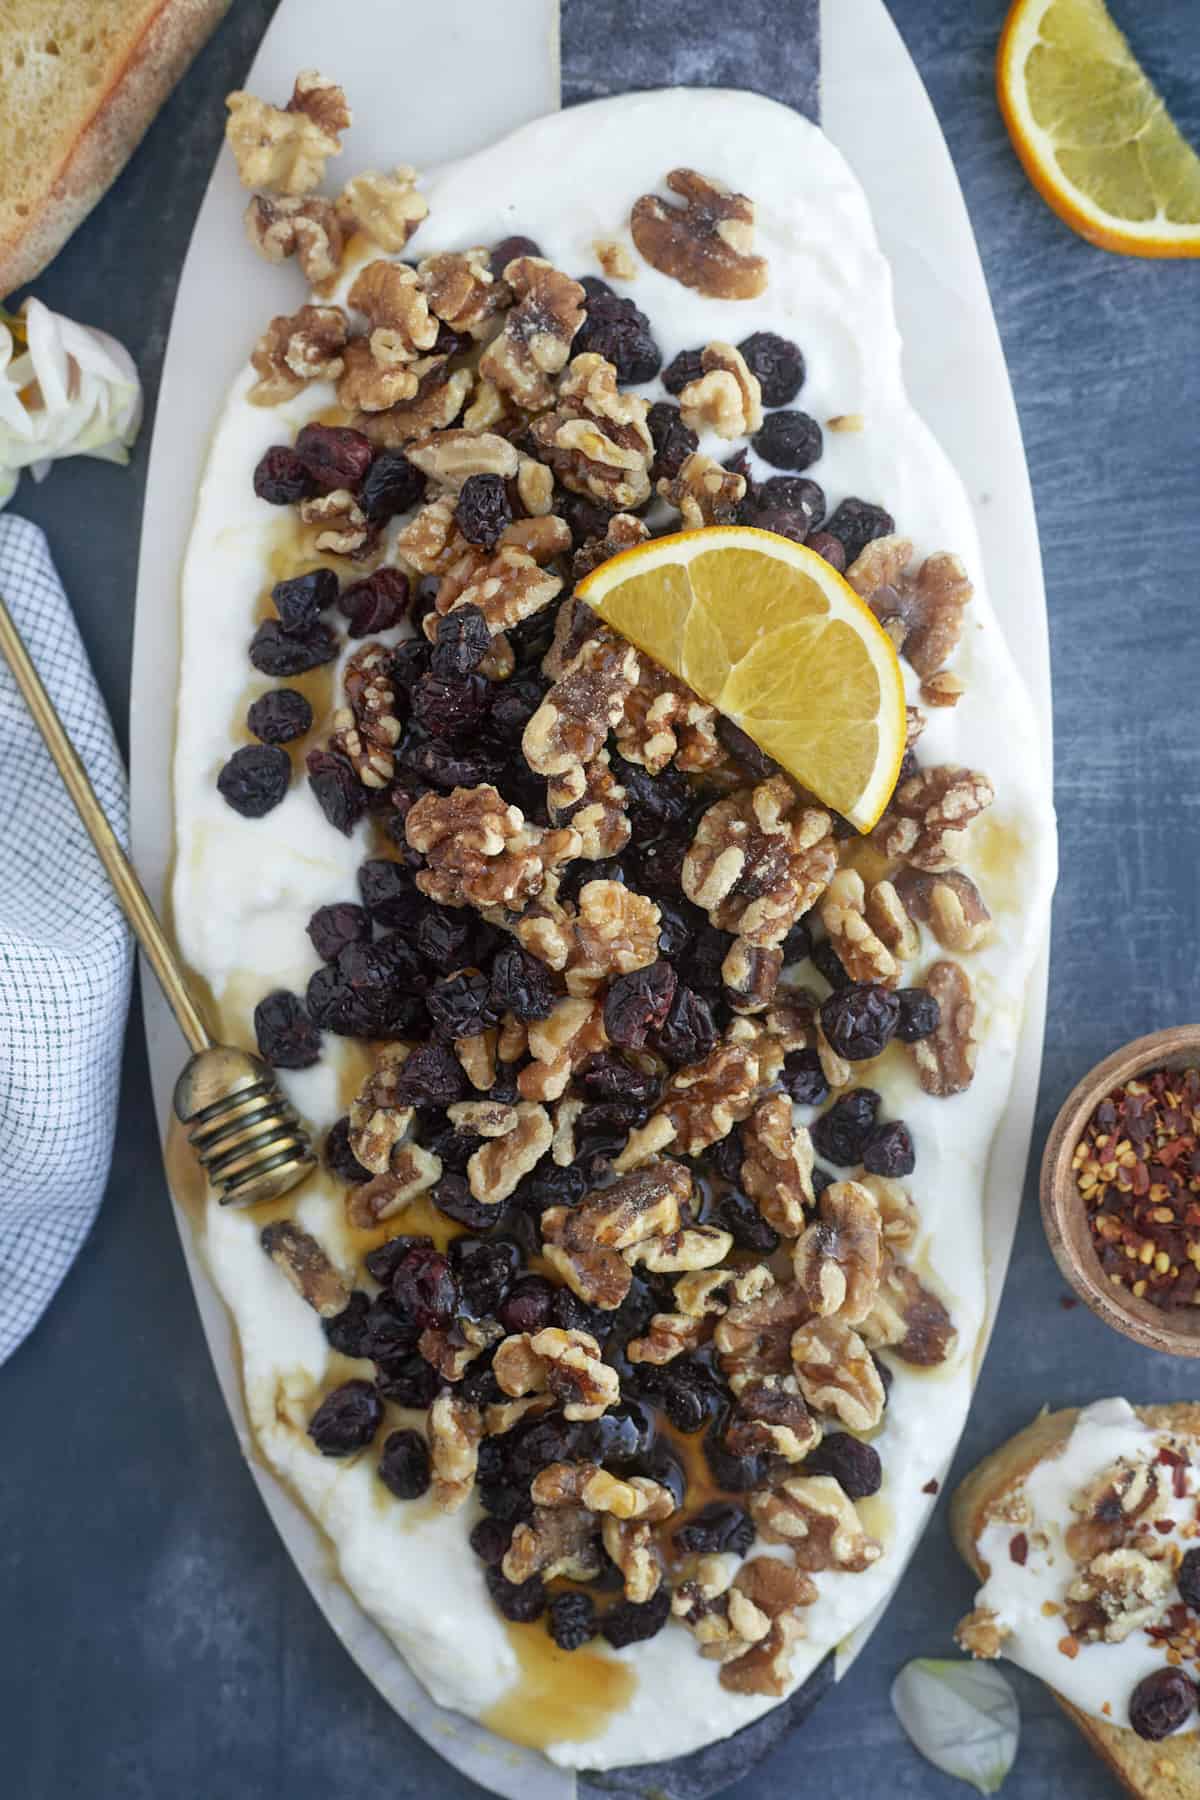 Whipped Feta with Cranberries and Walnuts